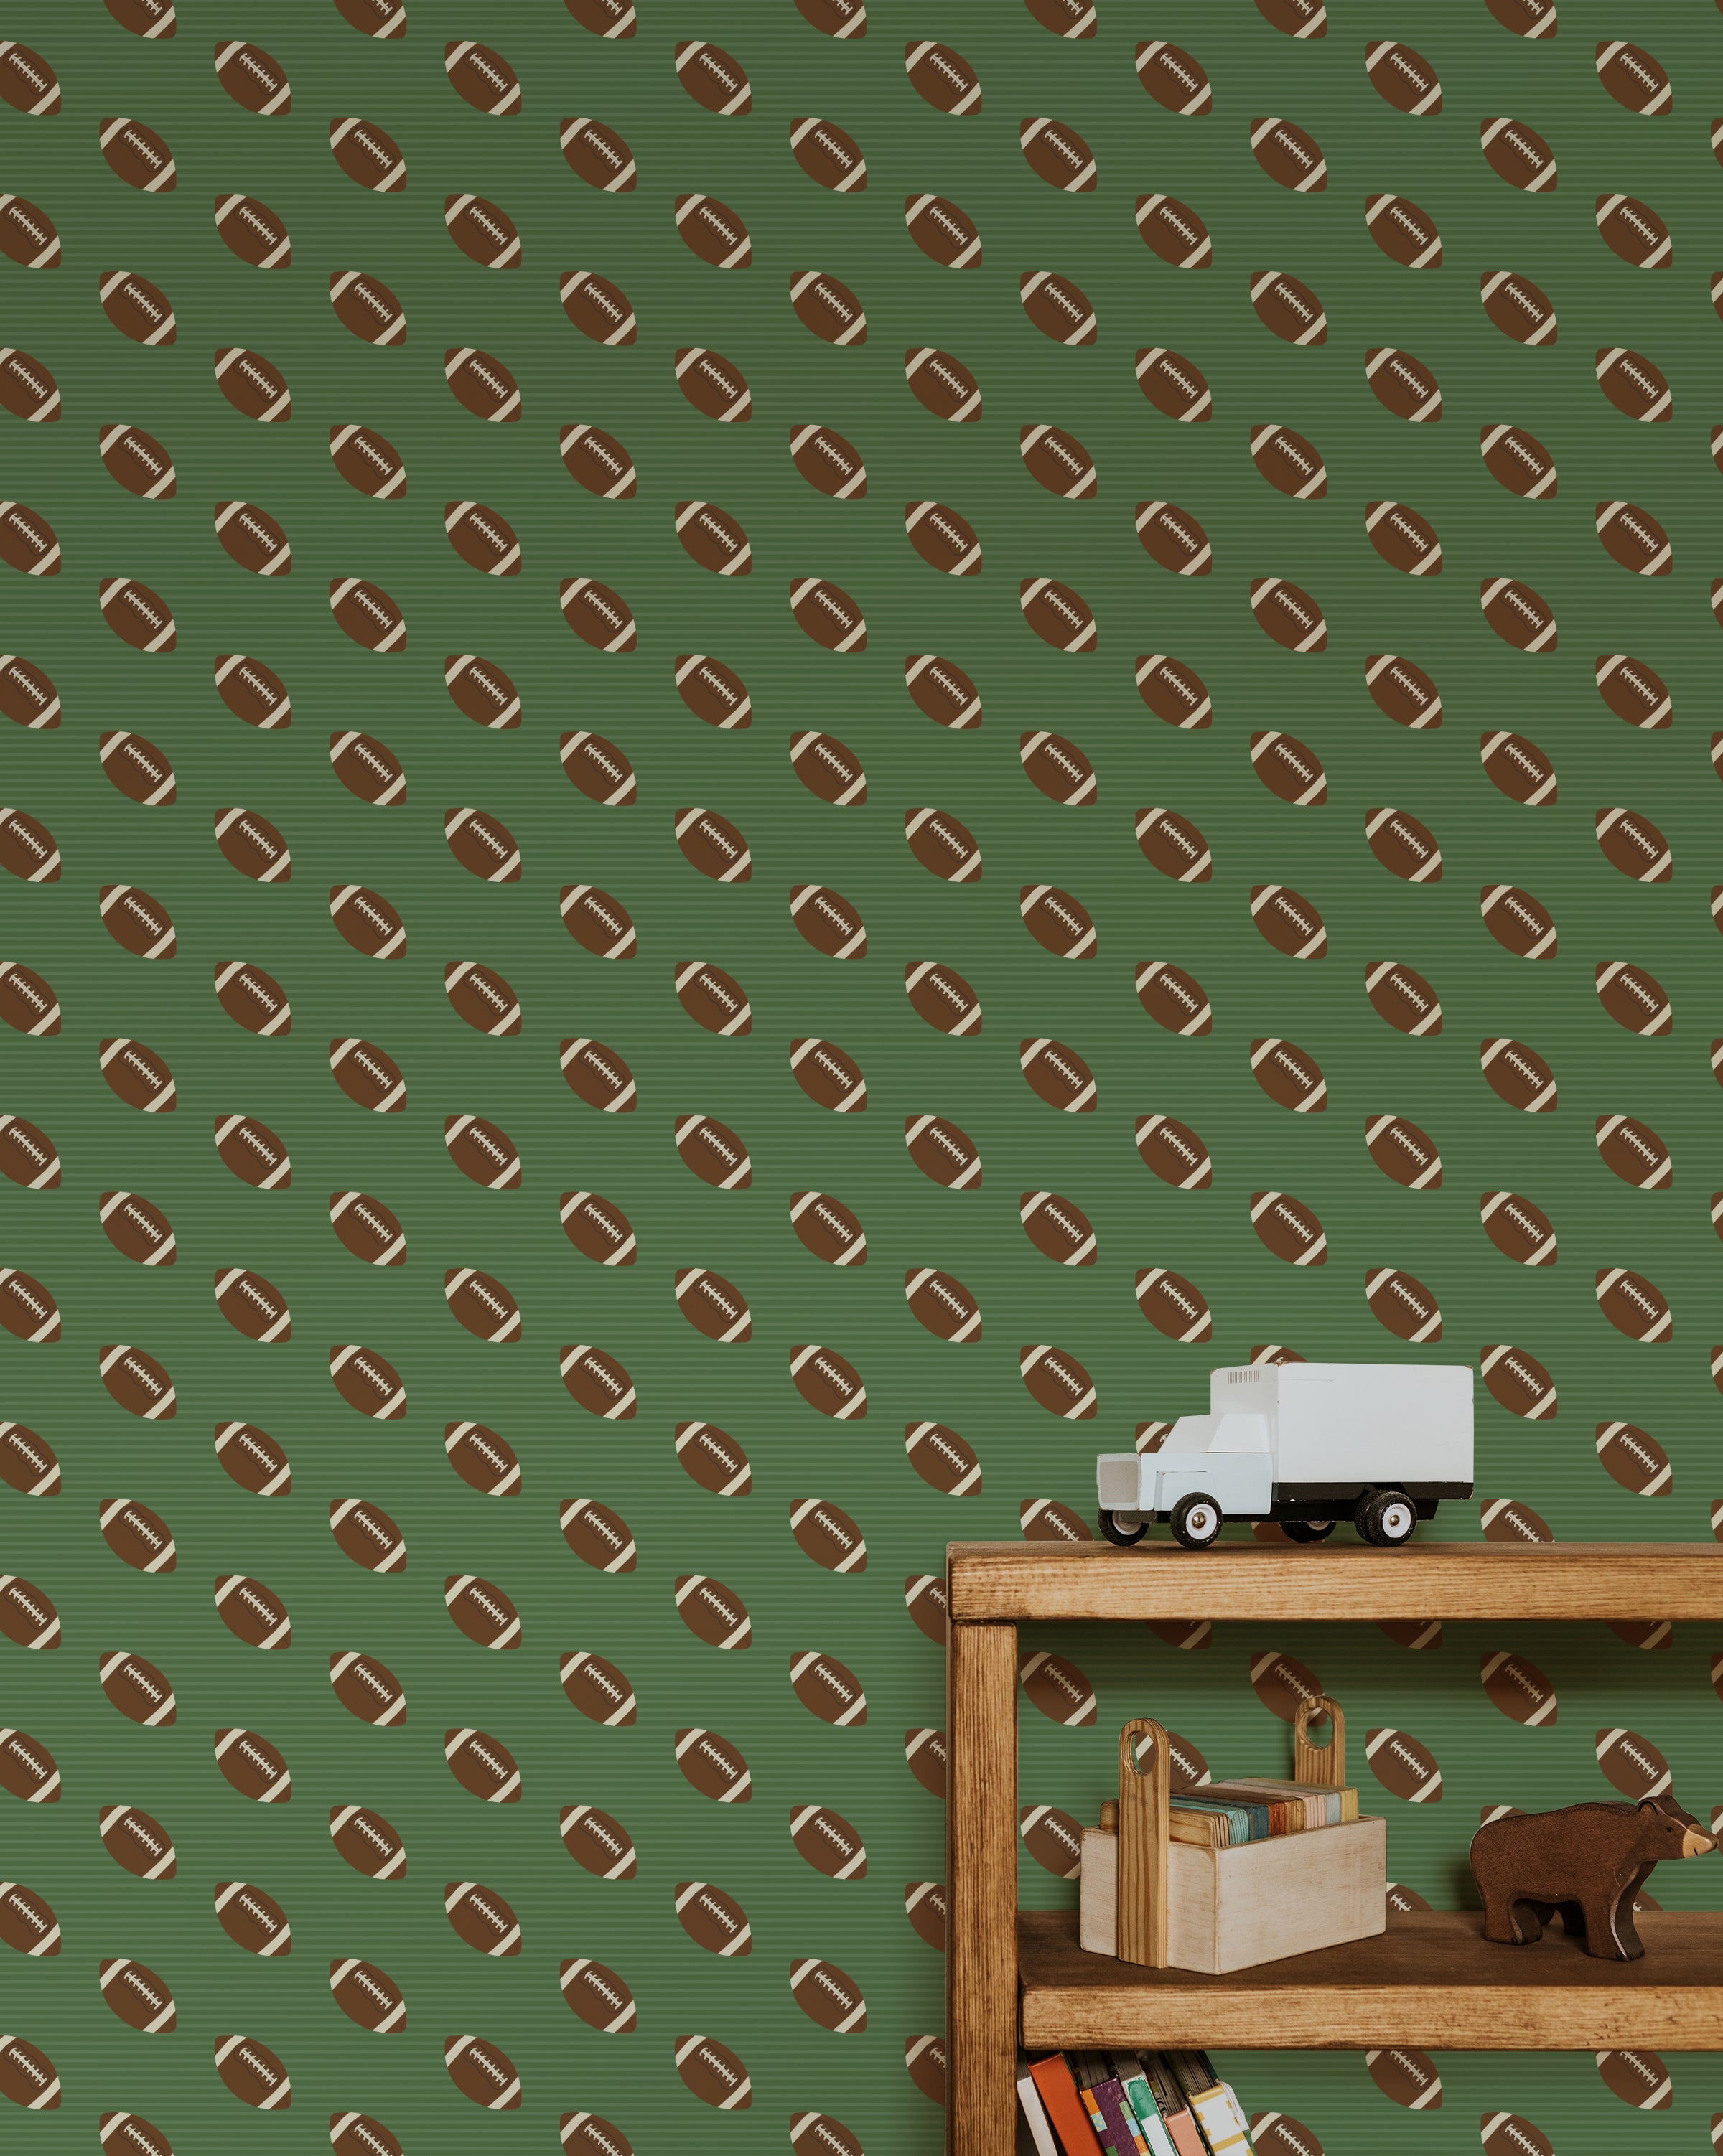 A playful children's room decorated with Football Frenzy wallpaper, showcasing a repeating pattern of brown footballs with white stripes on a green striped background. The room features a wooden bookshelf filled with toys and books.